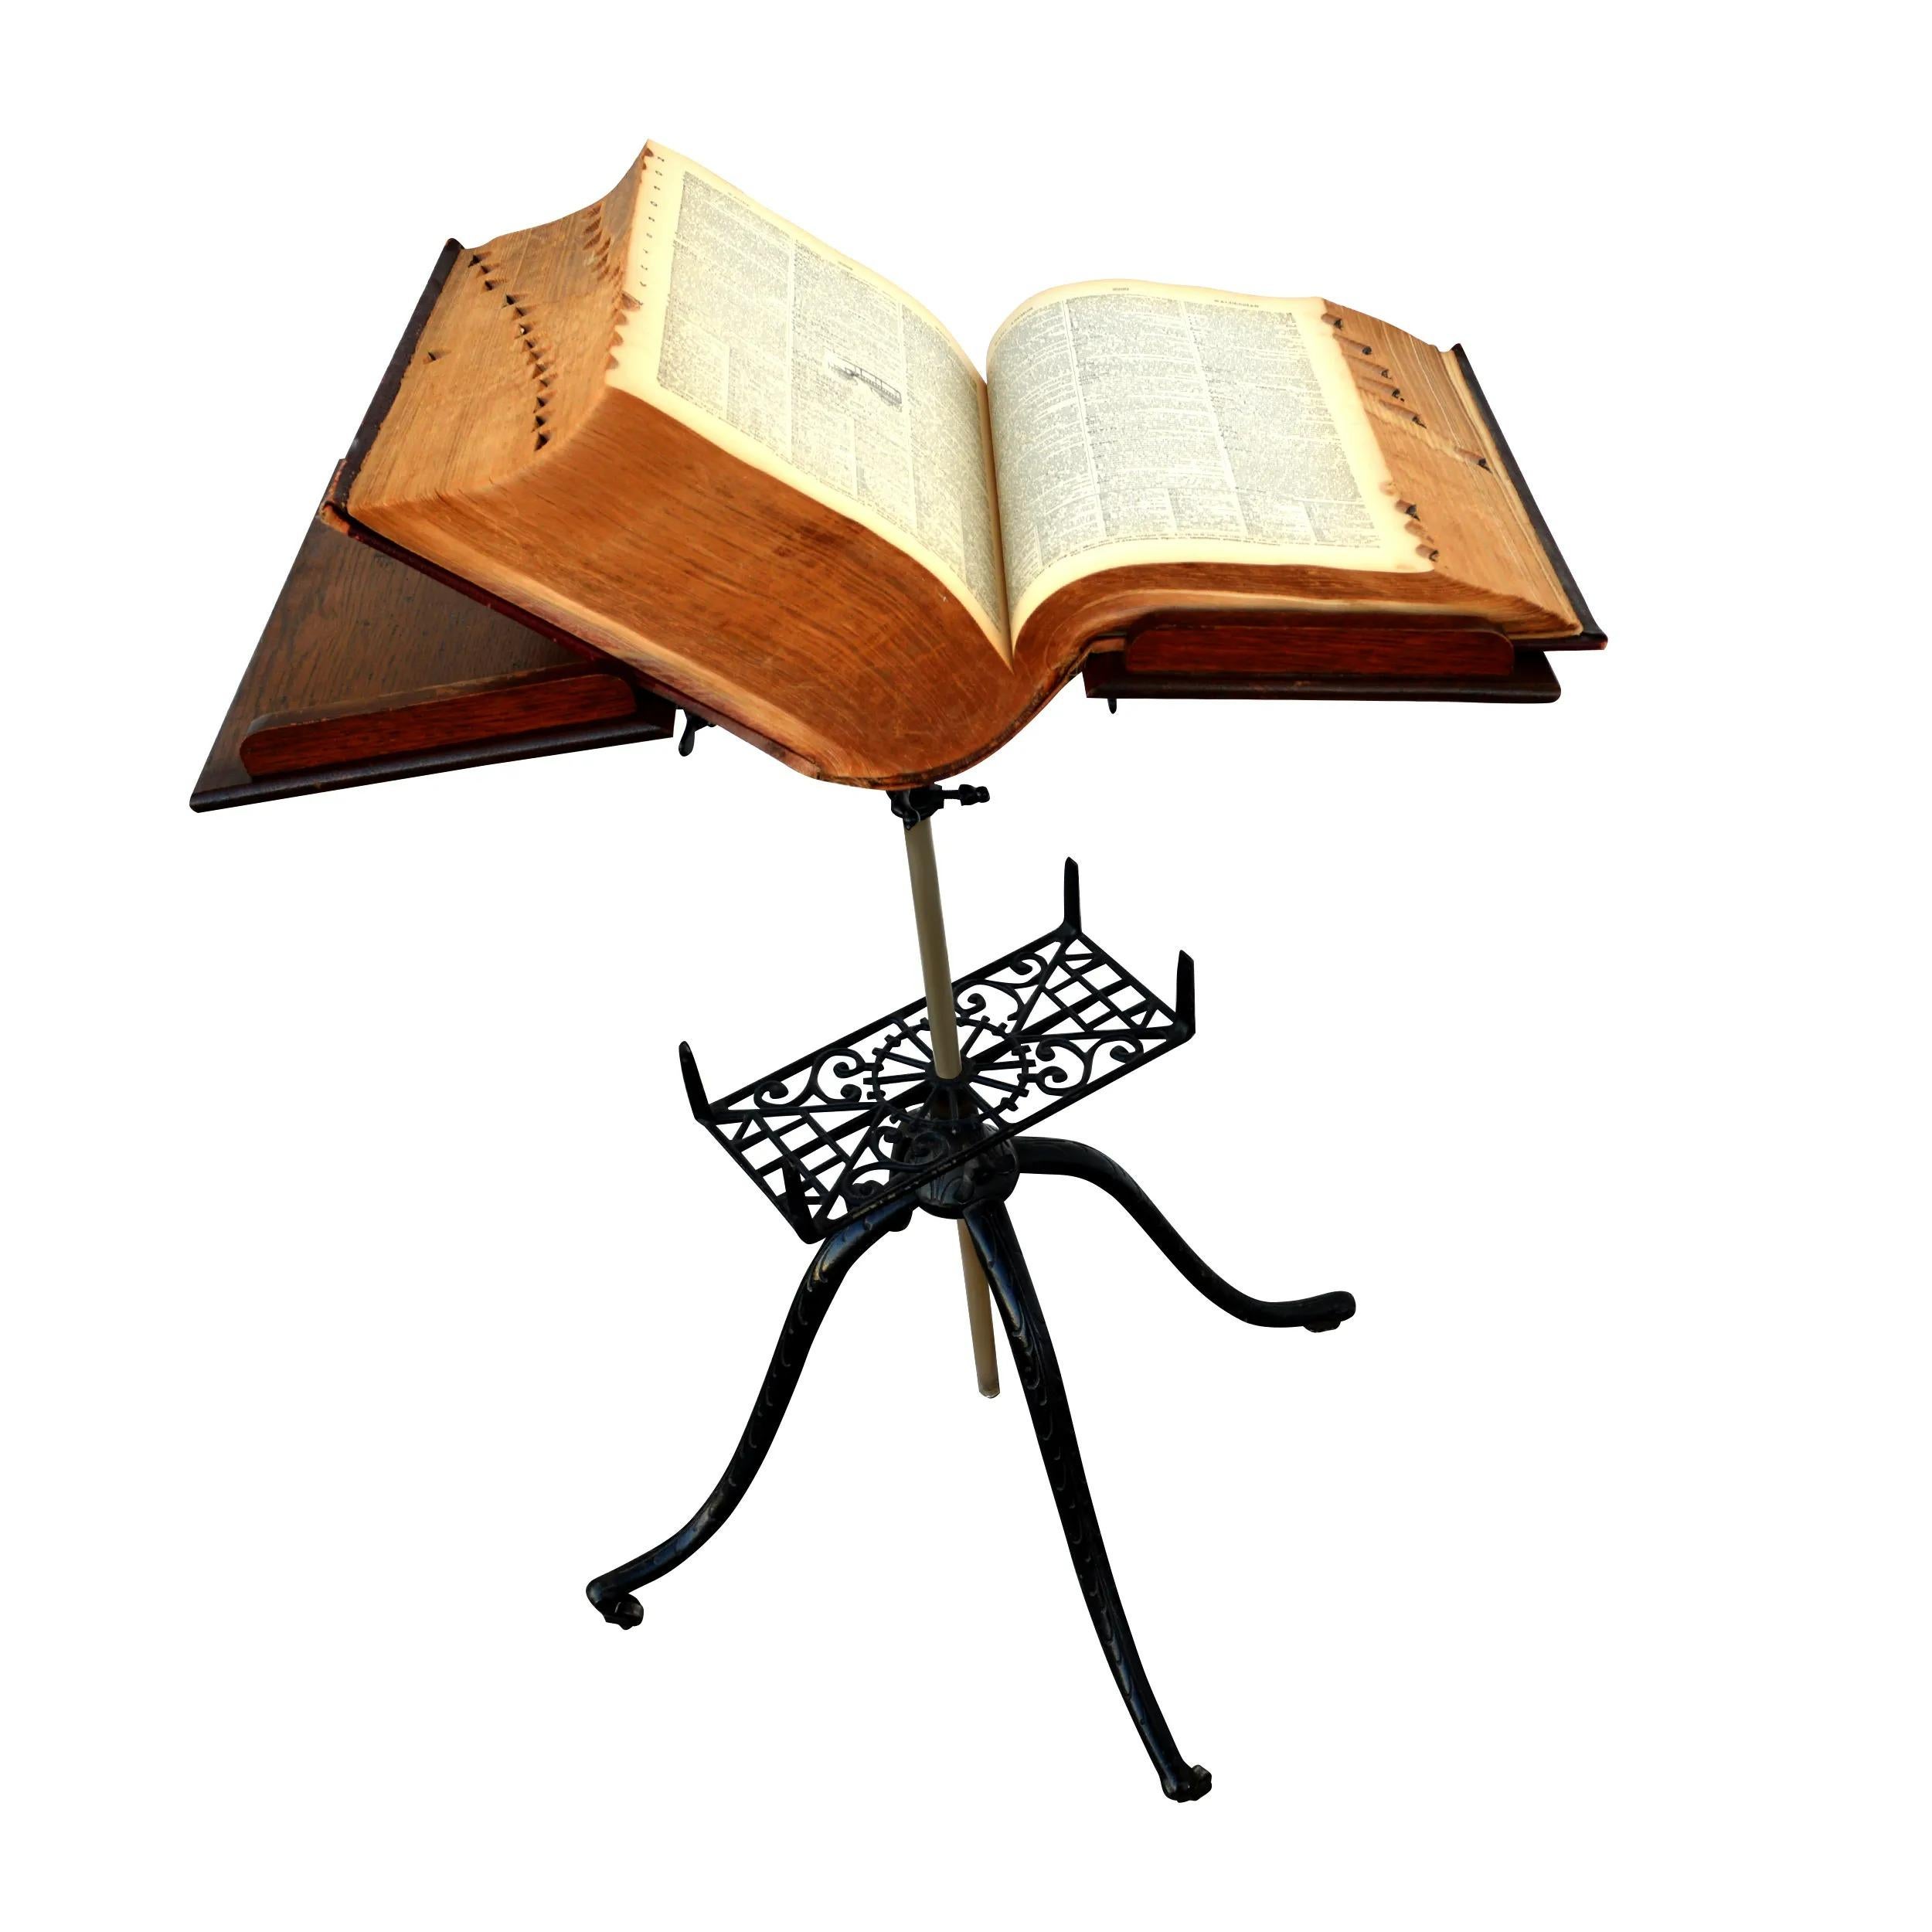 Antique oak cast-iron lectern or folio stand

Antique Arts & Crafts library or parlor book Stand traditionally used to display bibles. Featuring ornate wrought iron pedestal base and quartersawn oak book holder. Cast iron base with cabriole legs.